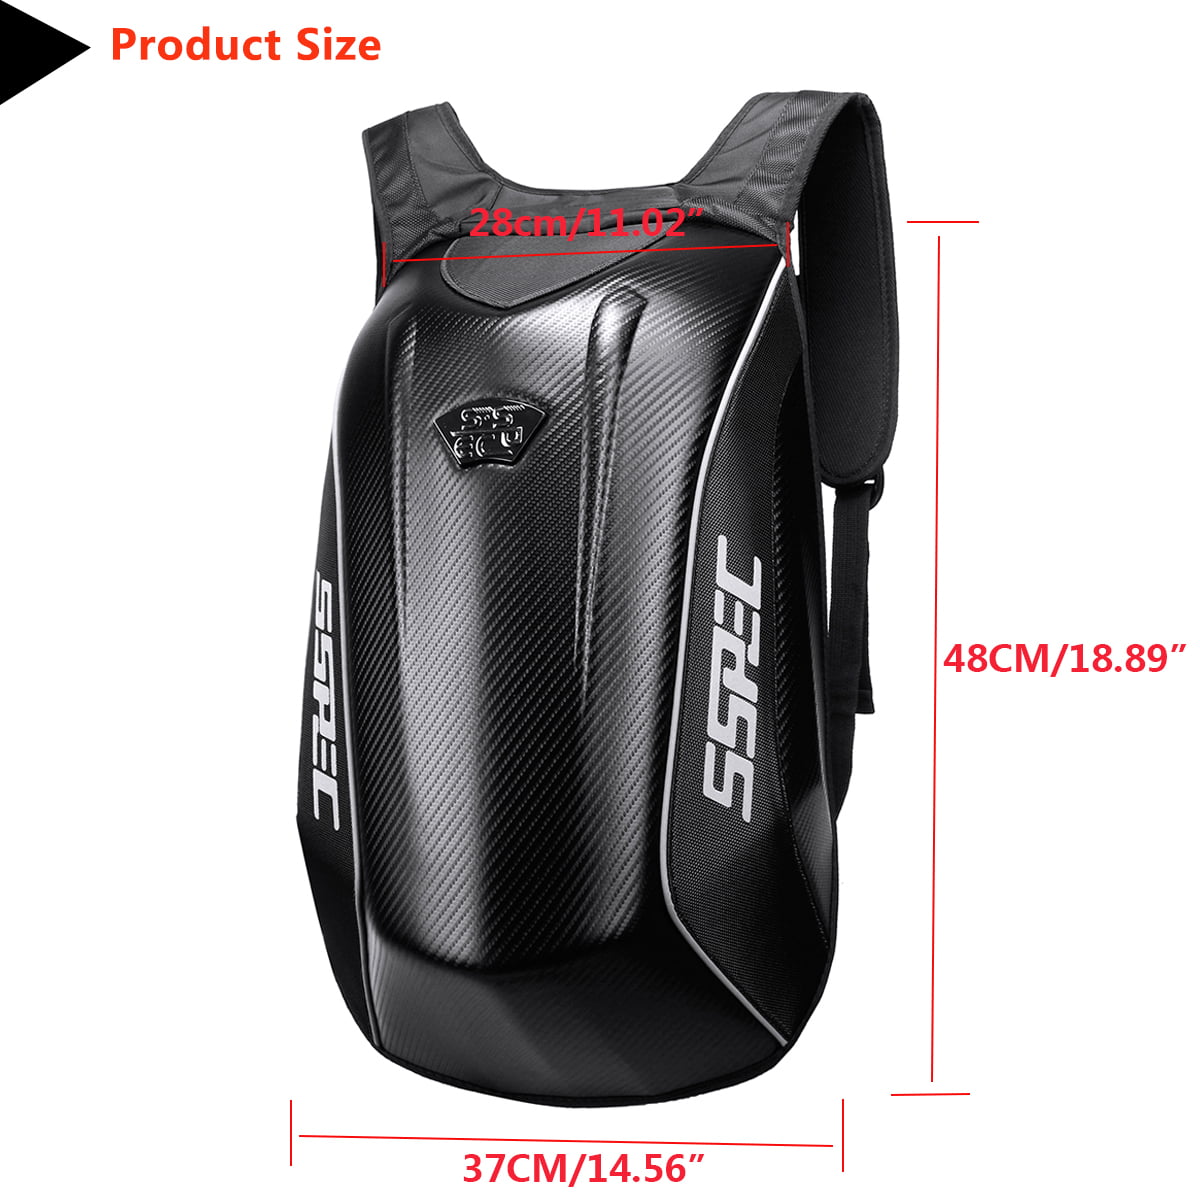 Details about   Universal Motorcycle Backpack Carbon Fiber Motocross Riding Racing Storage Bag 